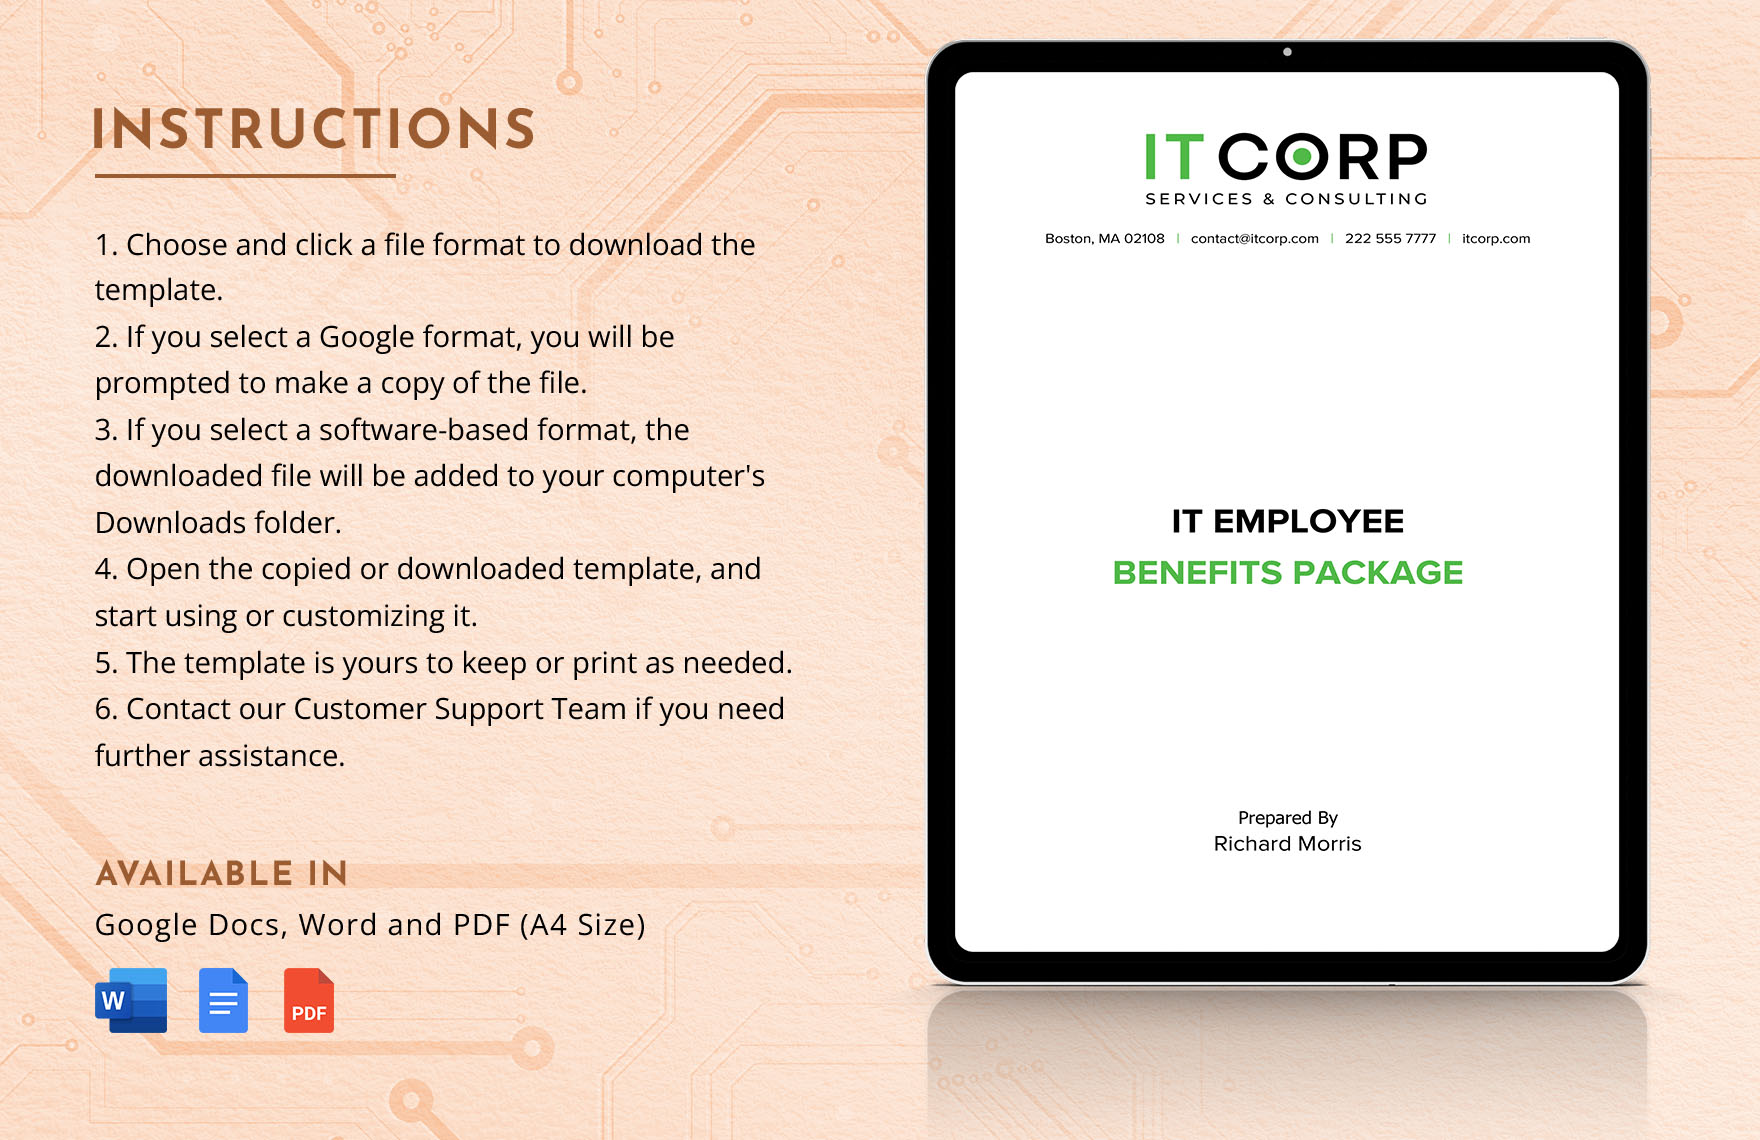 IT Employee Benefits Package Template